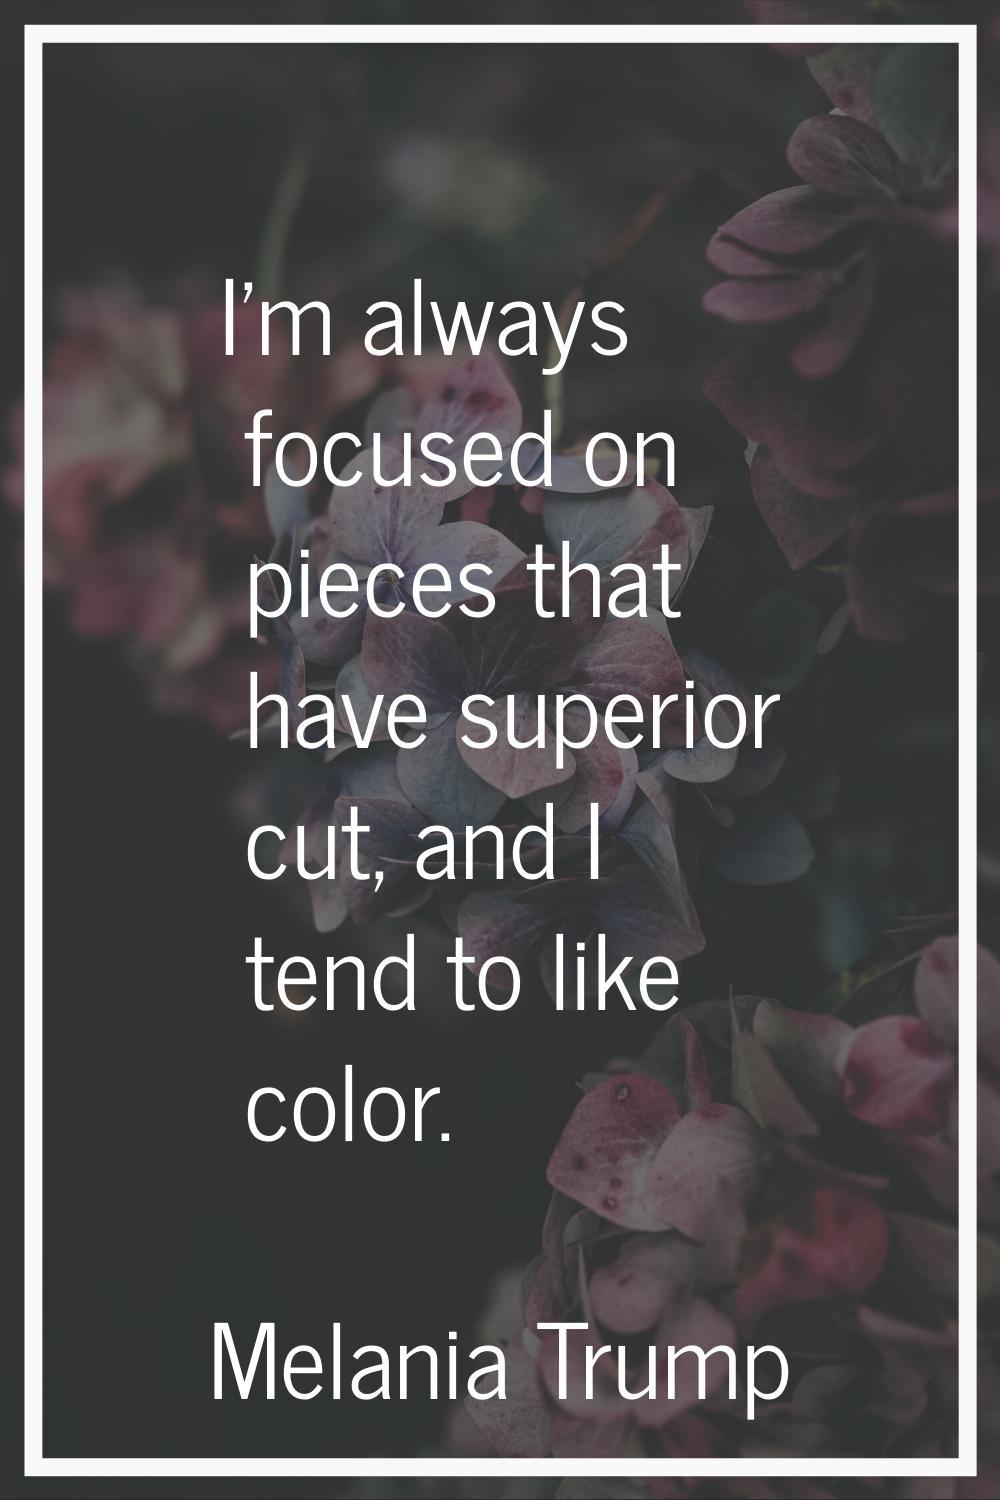 I'm always focused on pieces that have superior cut, and I tend to like color.